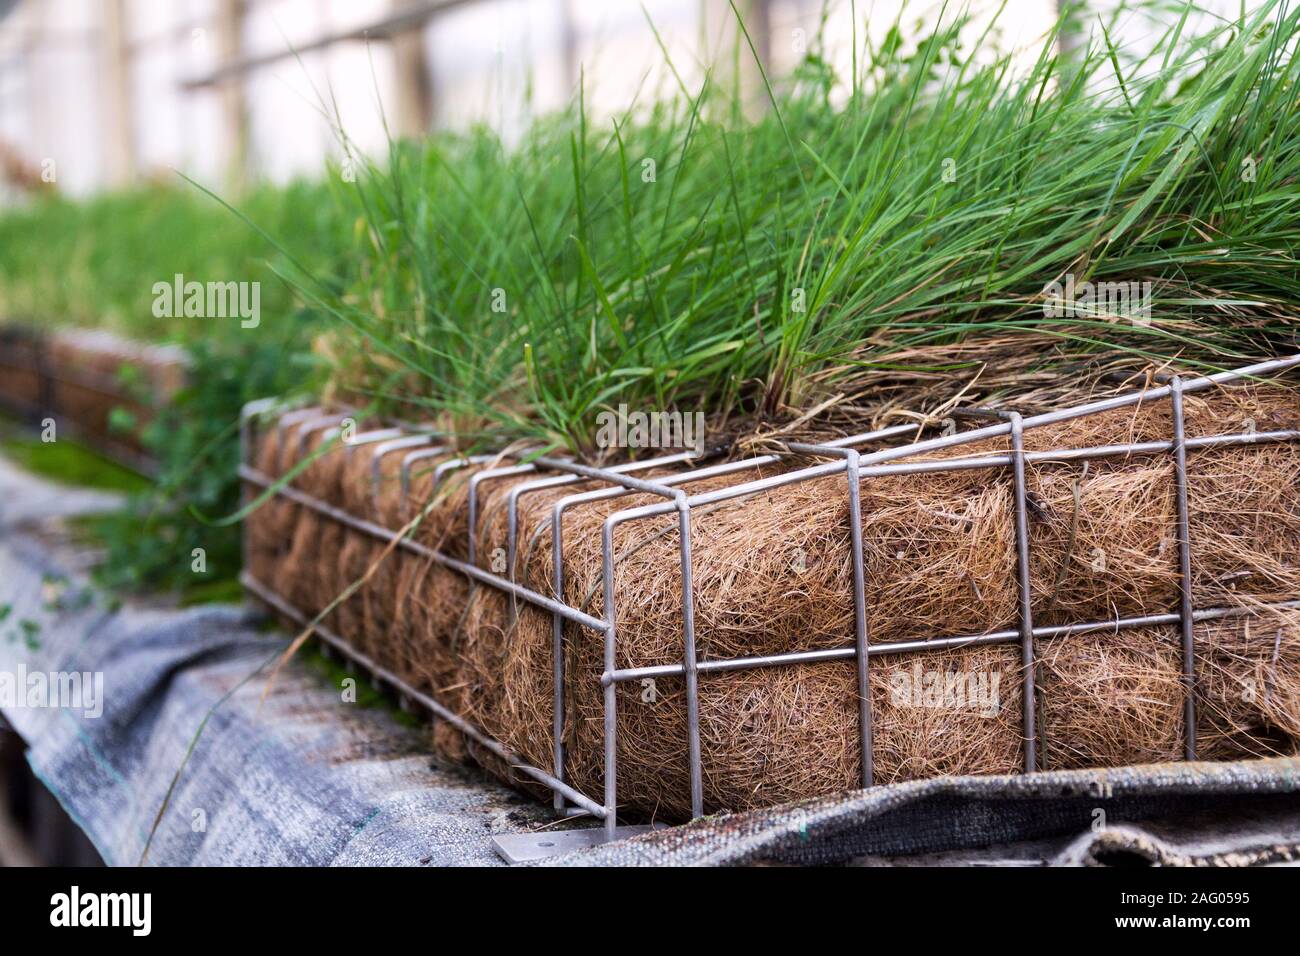 Green plants and grass growing through mesh of galvanized iron wire gabion box filled with soil, used for green living wall, vertical garden exterior Stock Photo